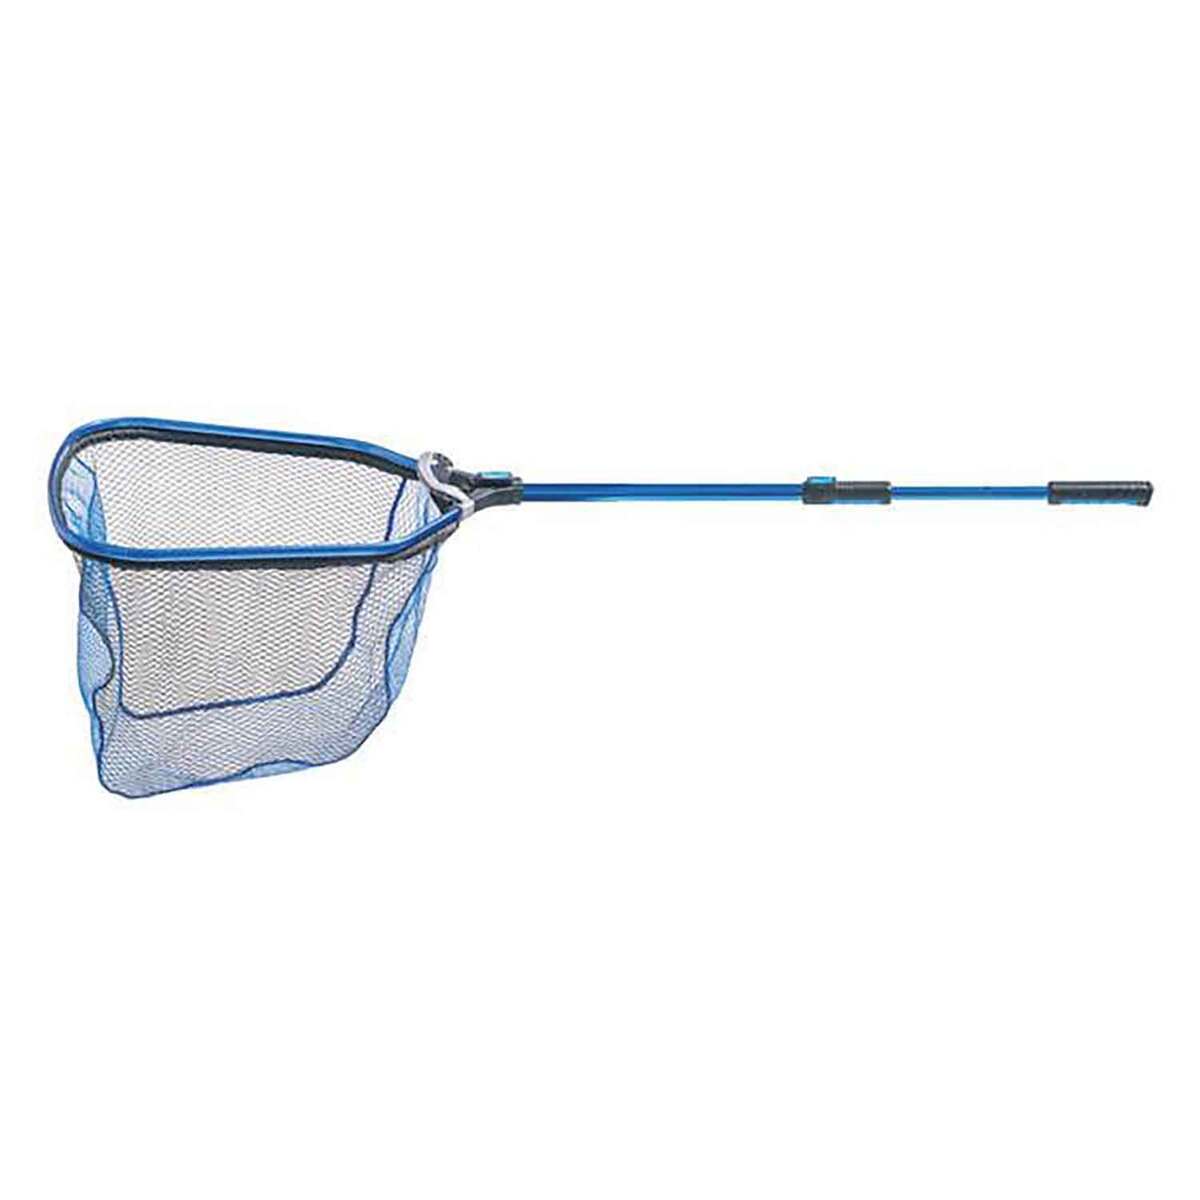 Black Paw Handy-Lift LED Square Net - Blue 24in x 20in by Sportsman's Warehouse